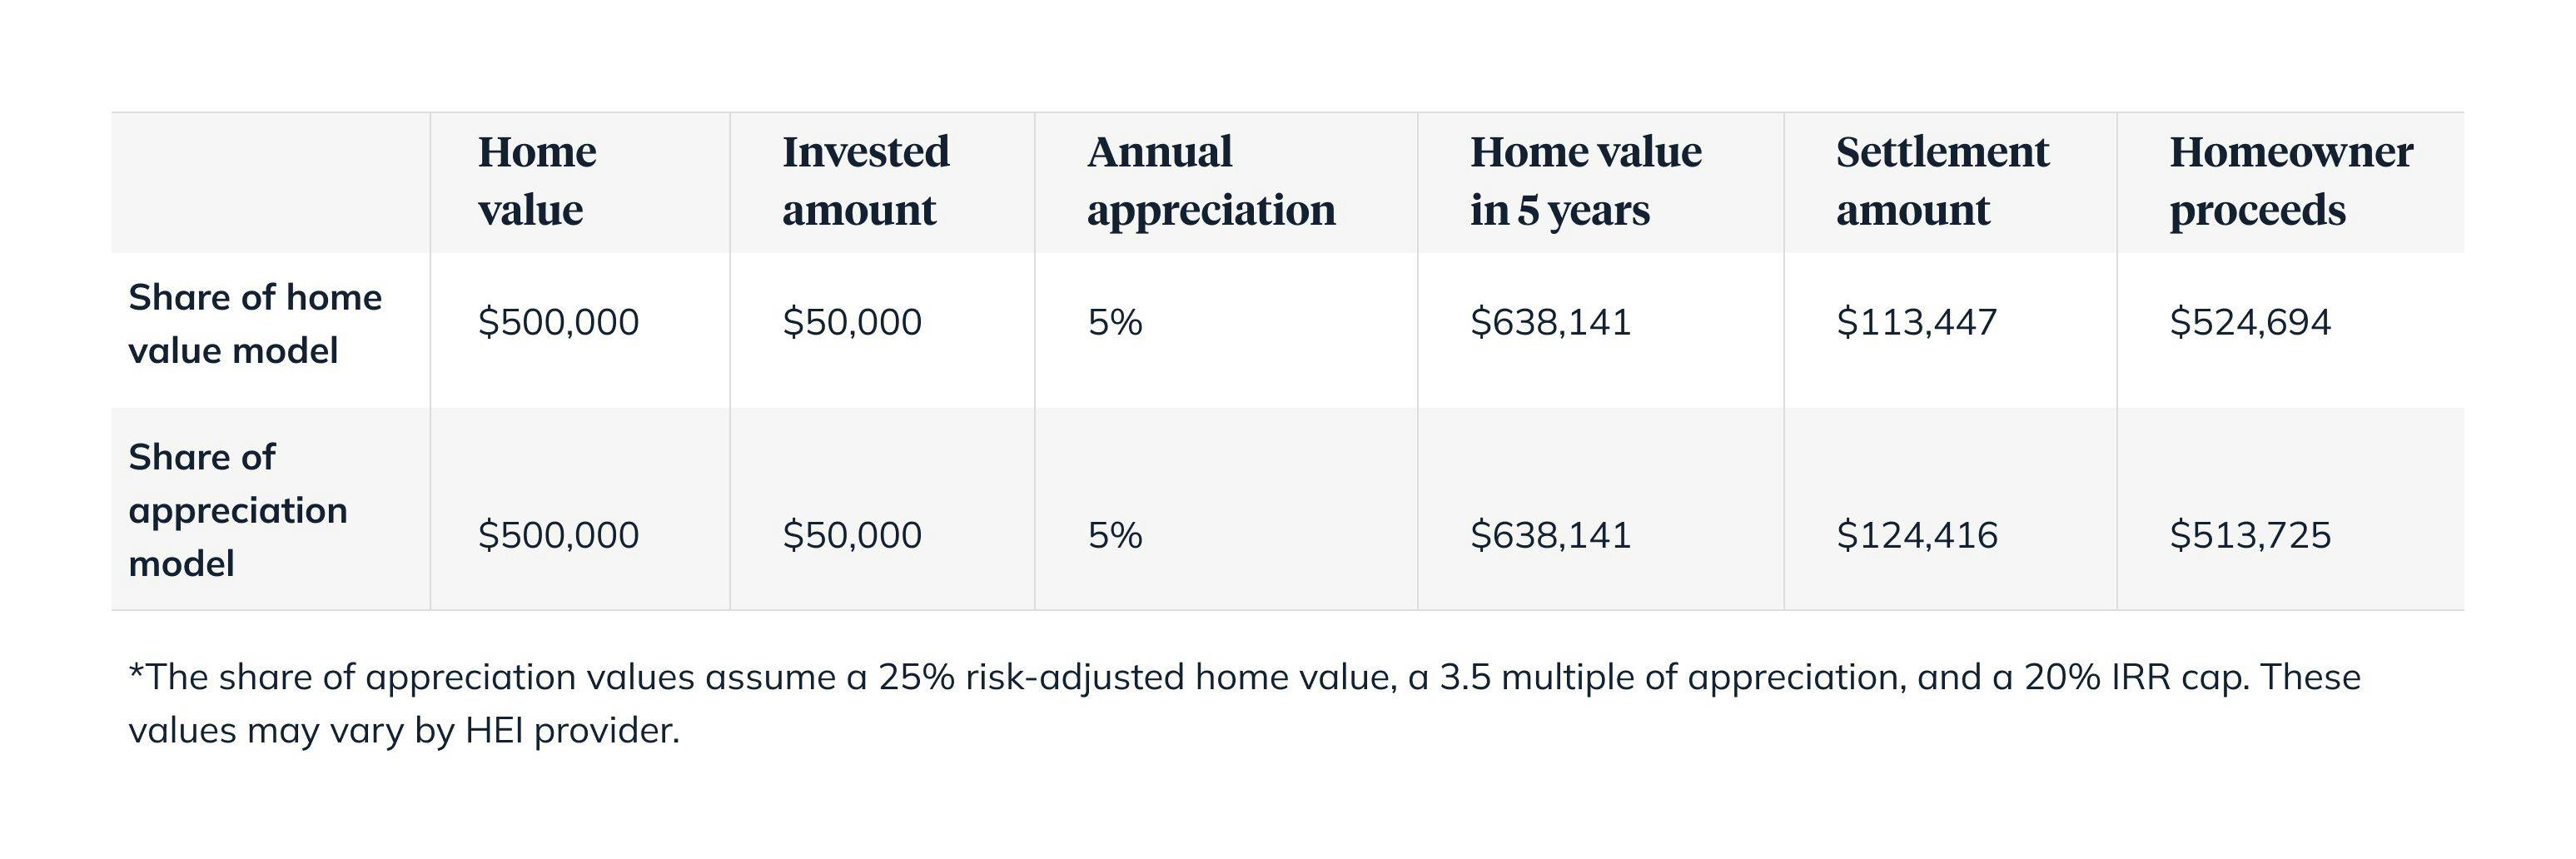 Share of home value compared to share of appreciation